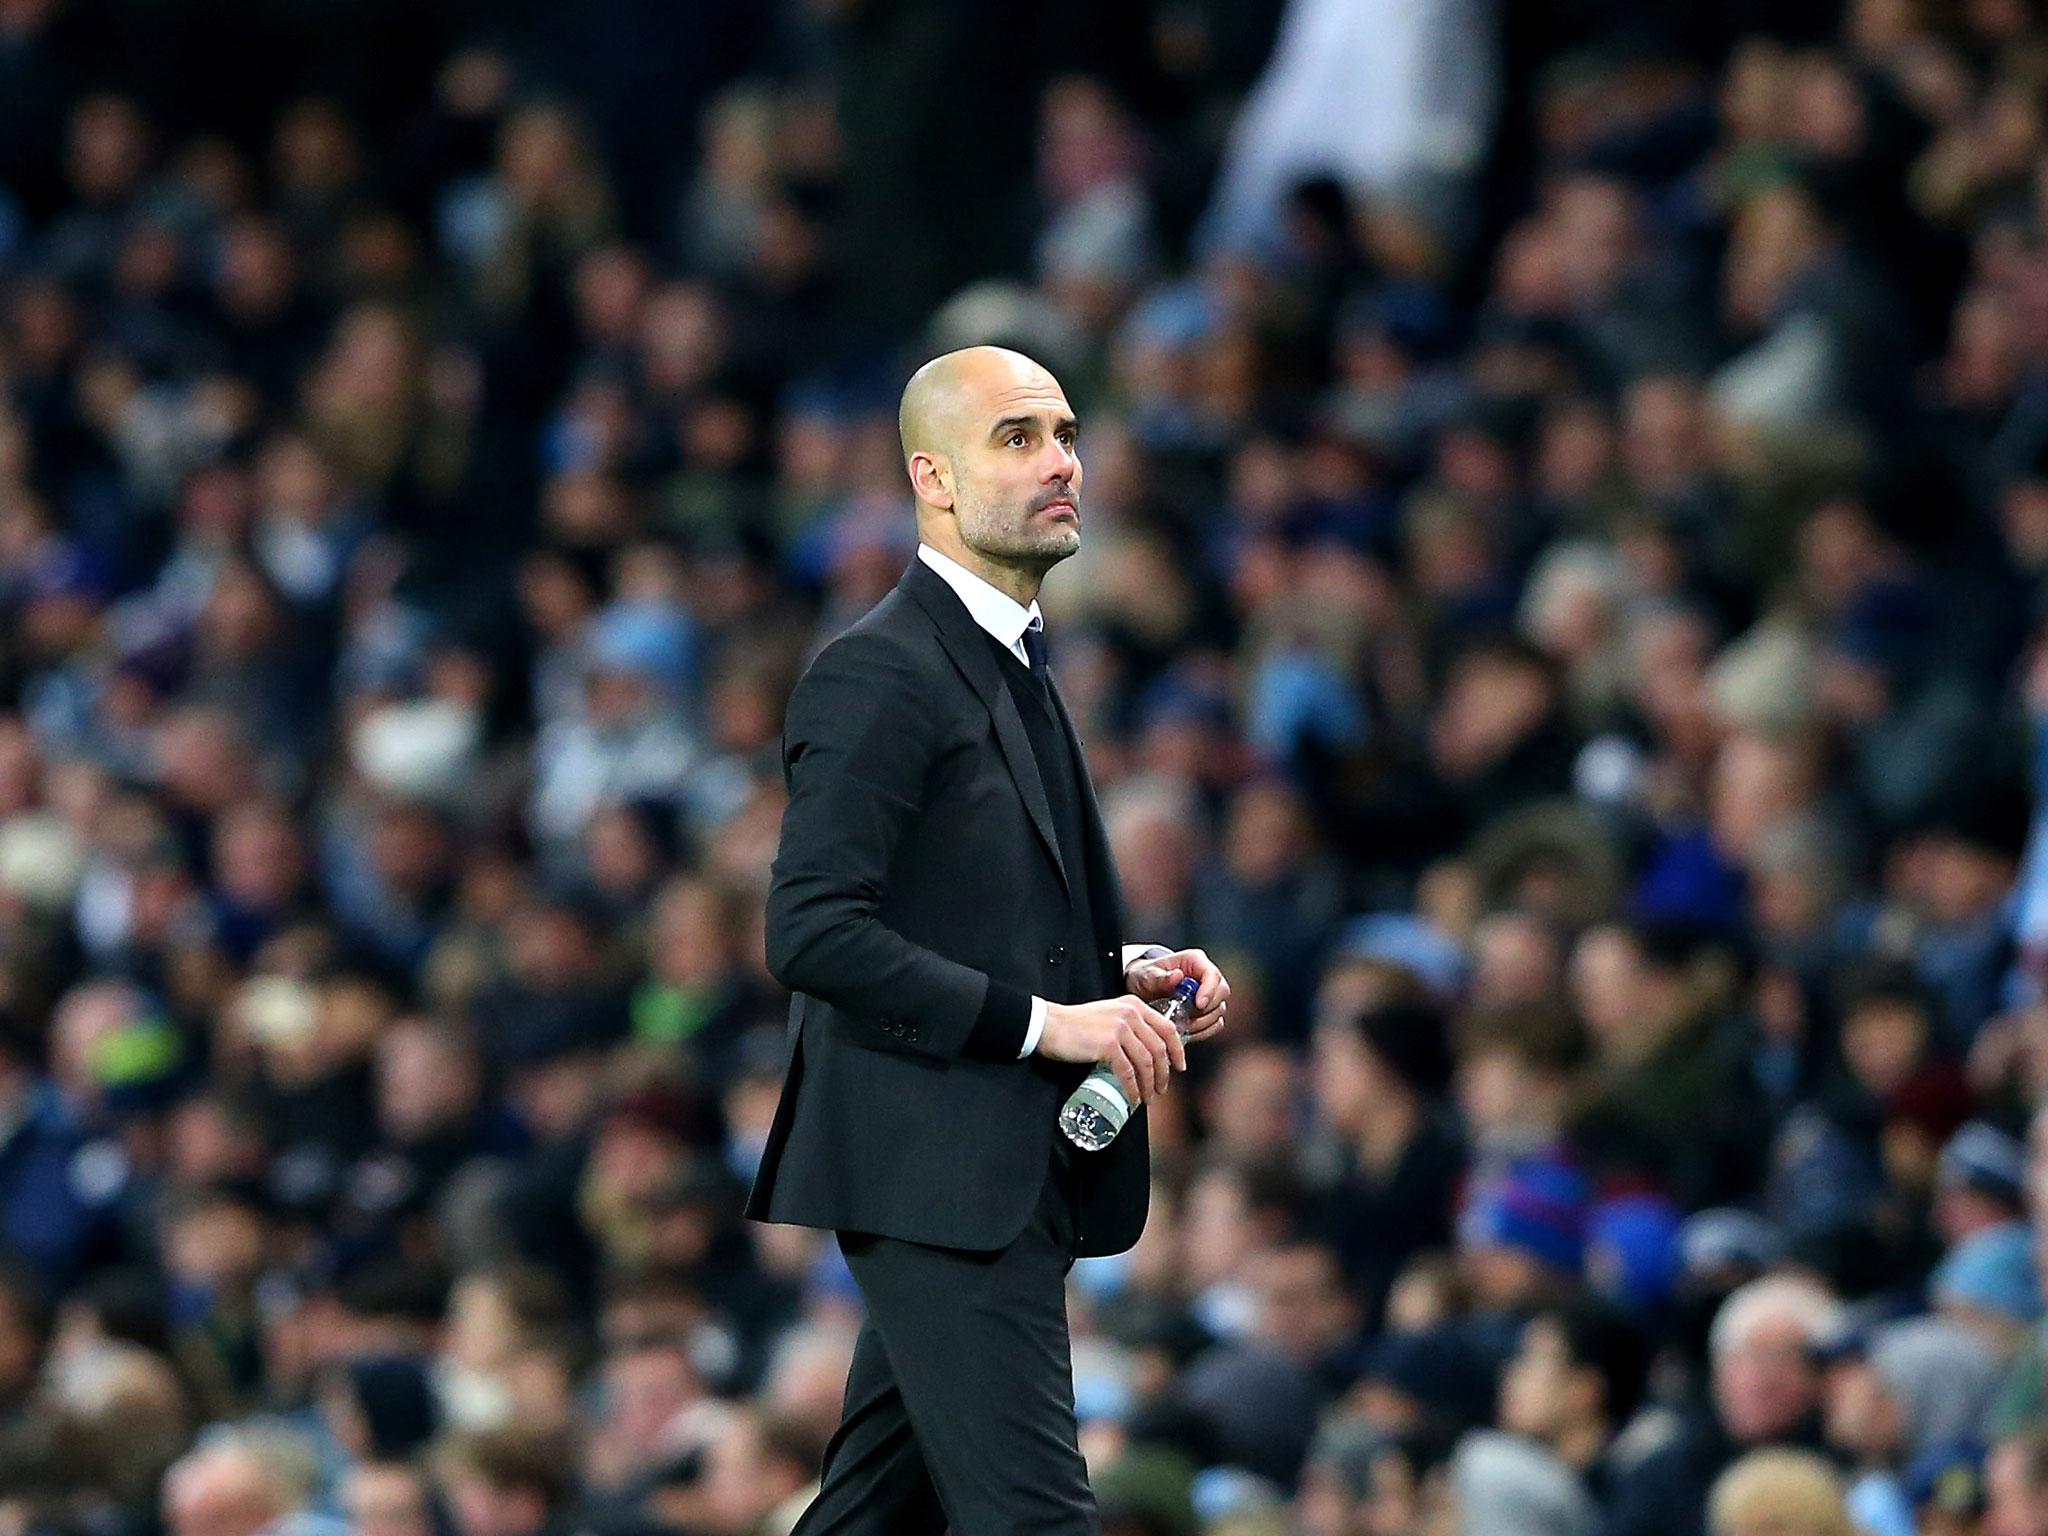 Pep Guardiola's Manchester City are starting to click